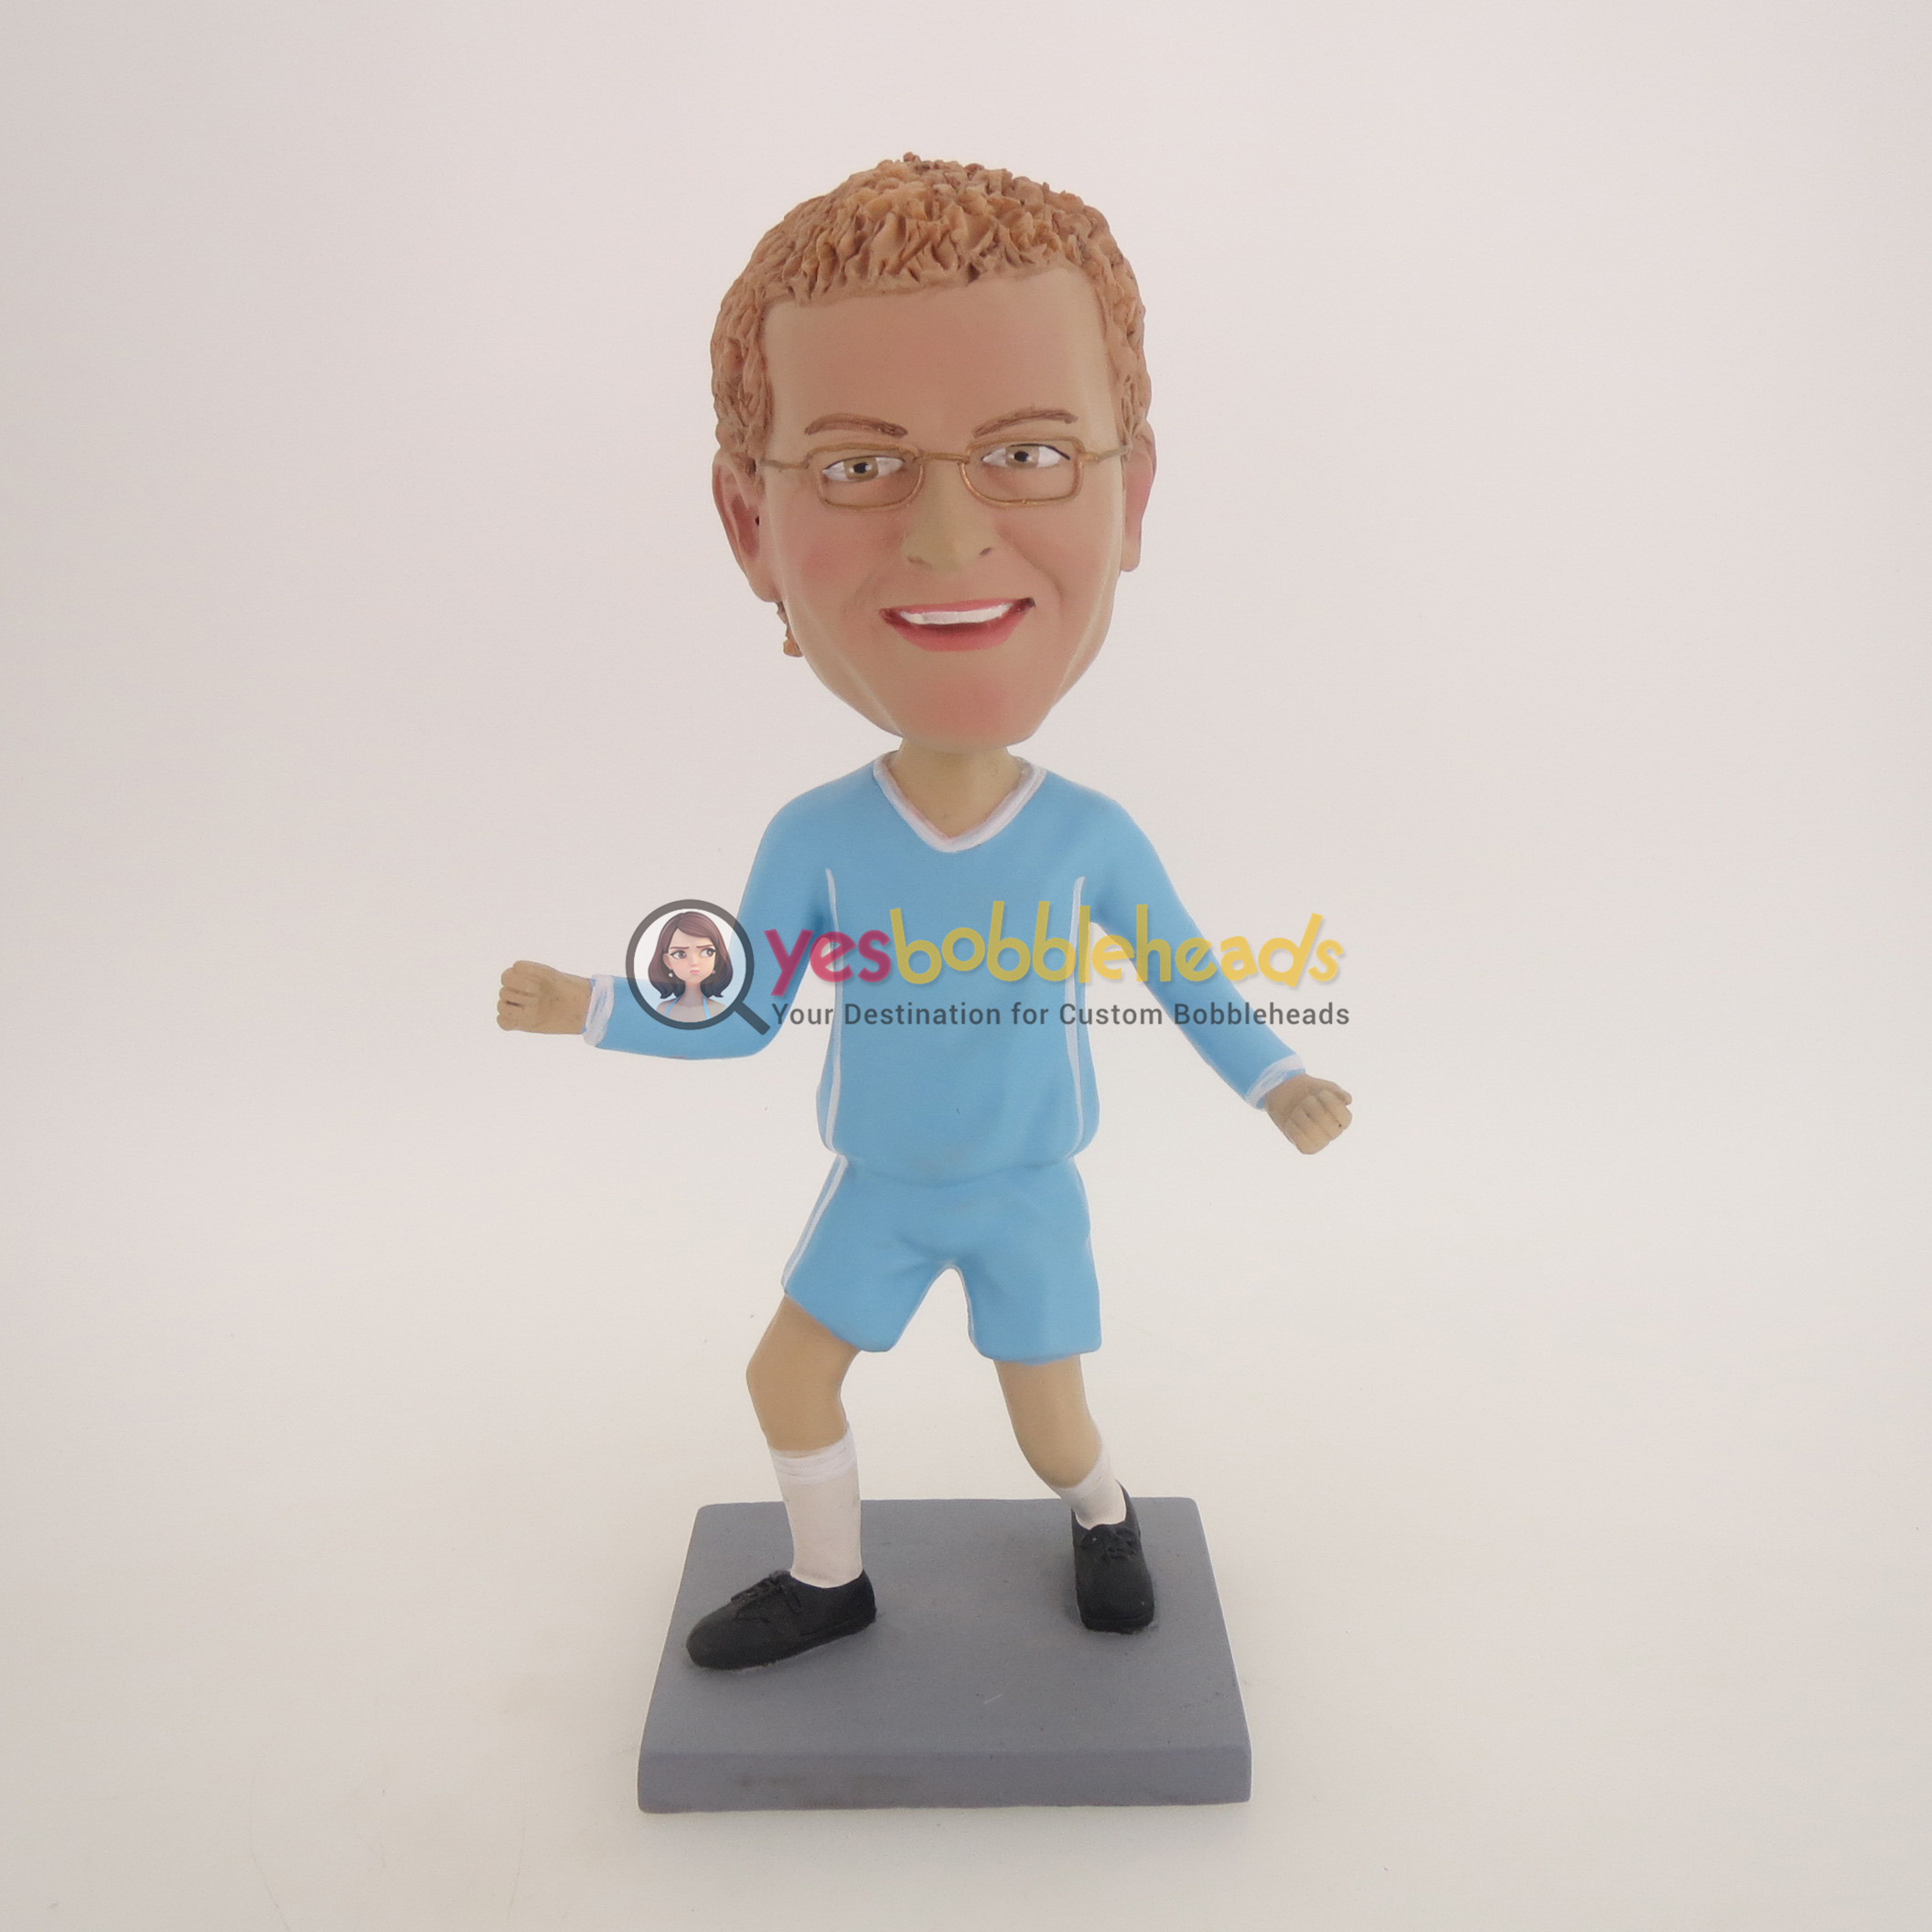 Picture of Custom Bobblehead Doll: Man Ready To Excercise